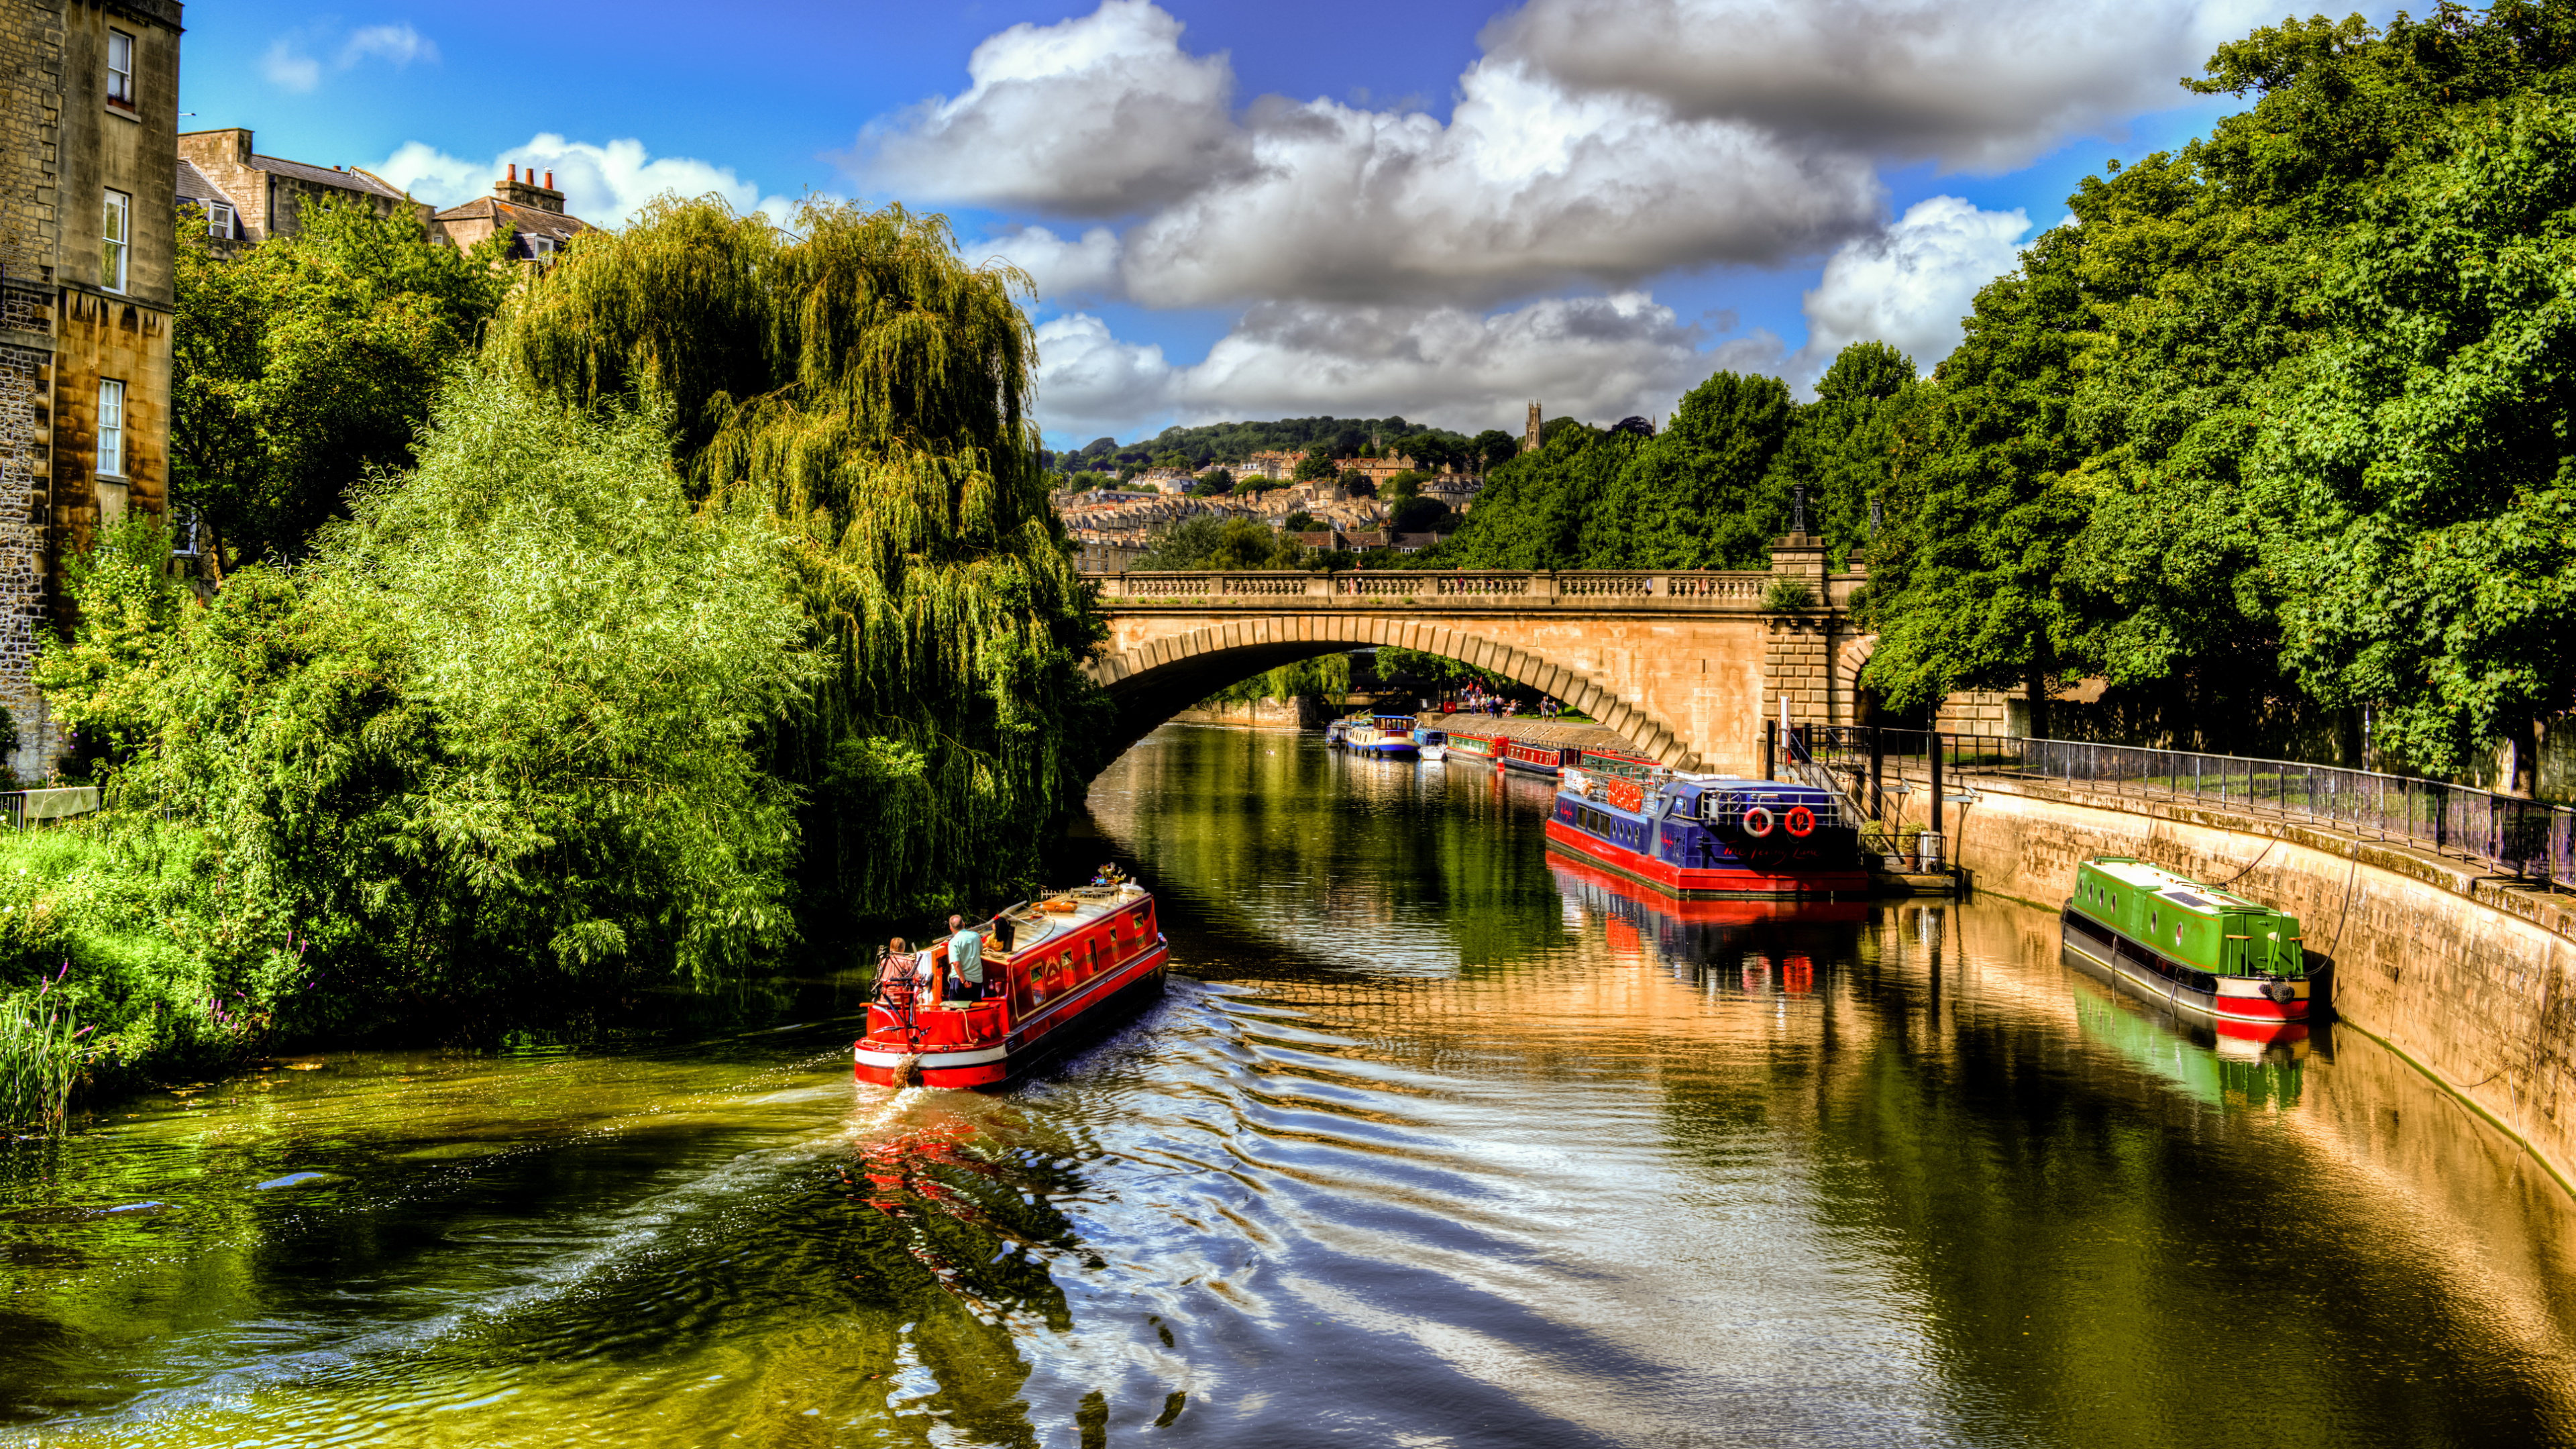 Red Boat on River Near Green Trees Under Blue Sky and White Clouds During Daytime. Wallpaper in 3840x2160 Resolution